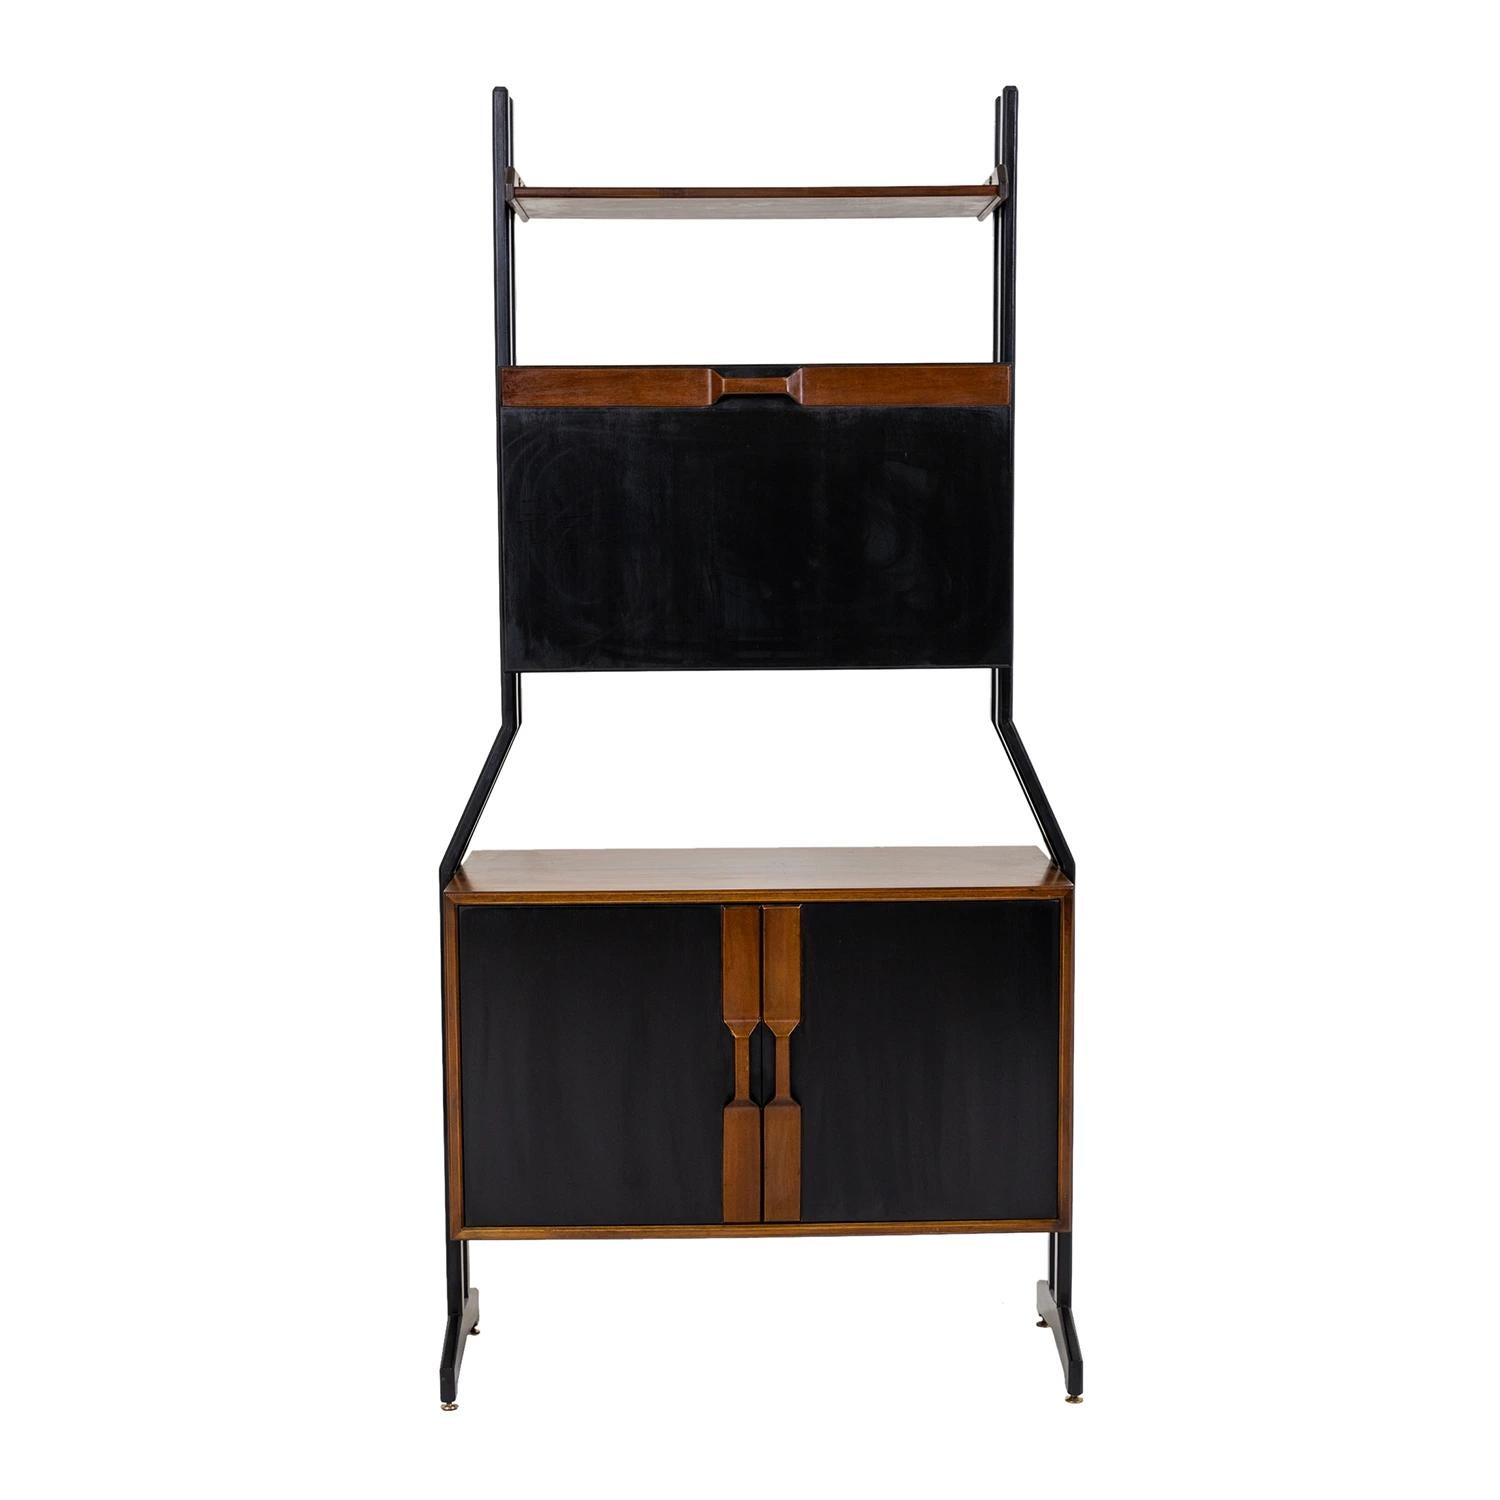 Polished 20th Century Italian Pair of Walnut Shelves, Rosewood Cabinets by Vittorio Dassi For Sale